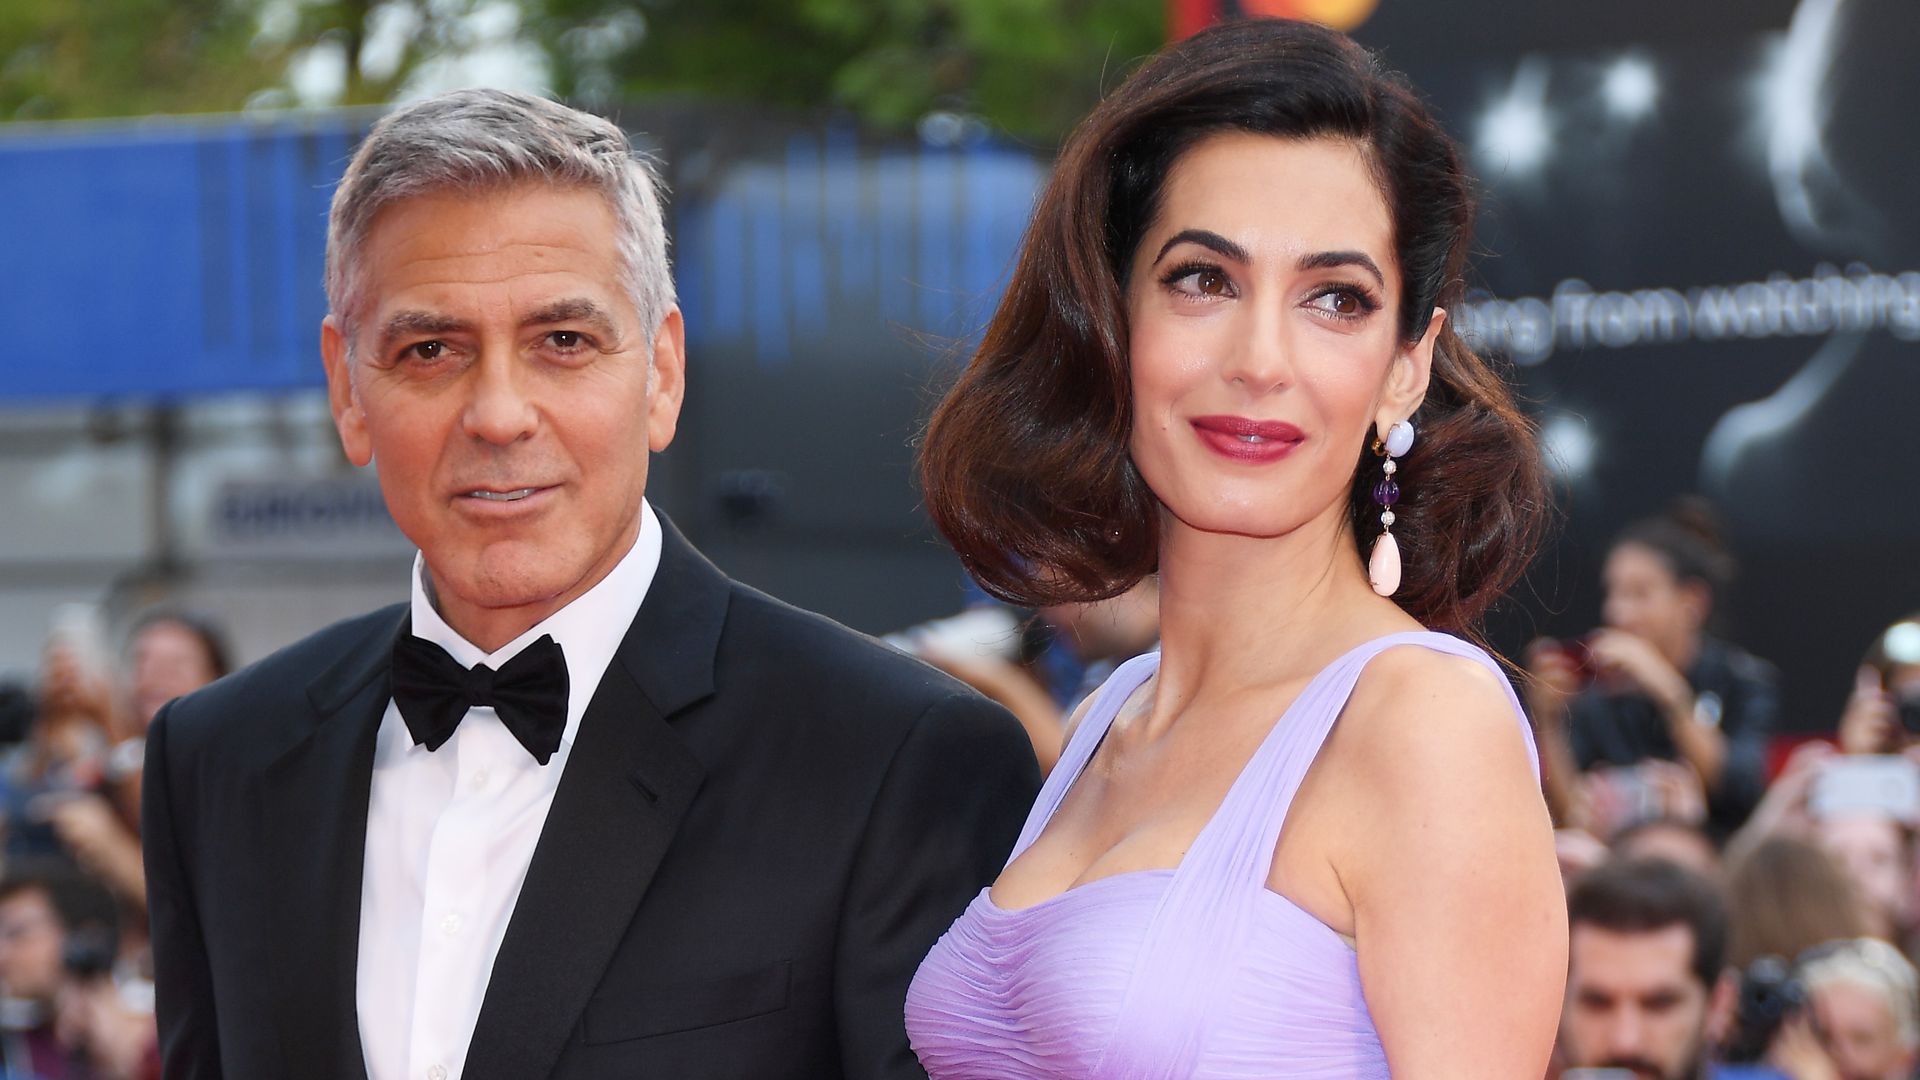 George Clooney and Amal Clooney at the 74th Venice Film Festival